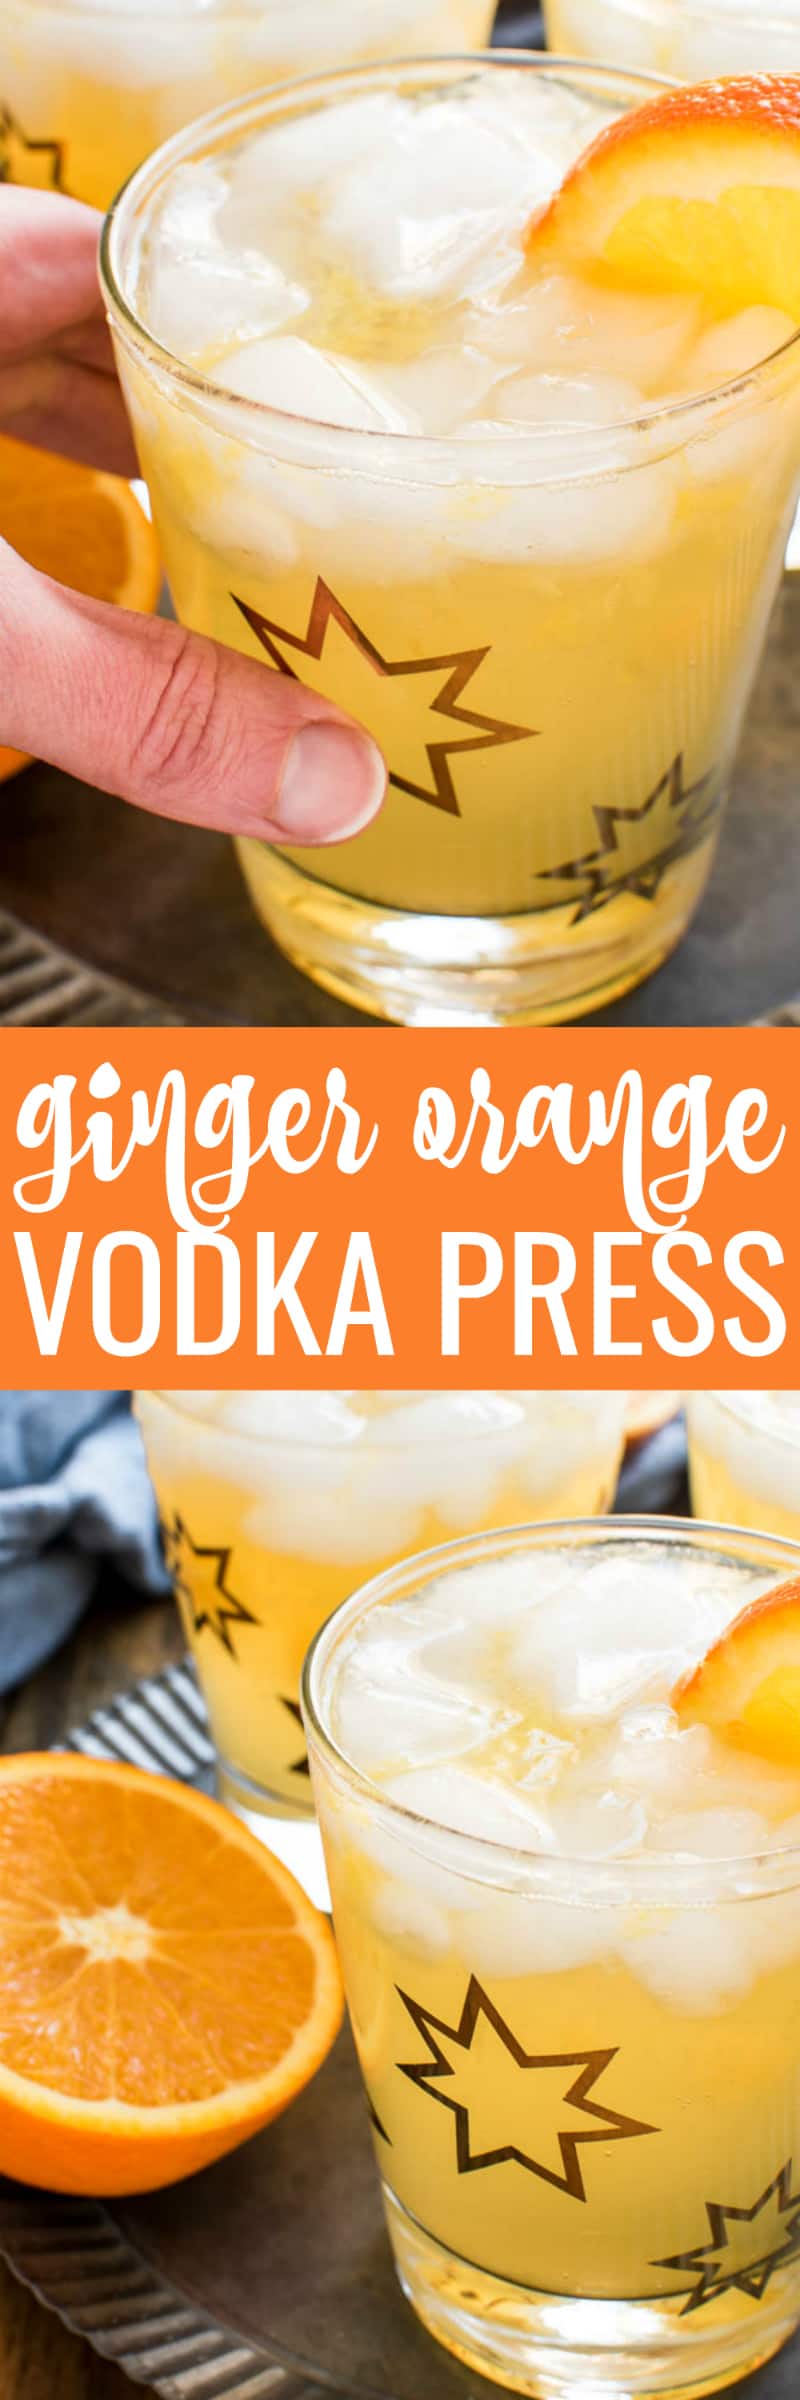 Looking for a delicious new winter cocktail? Look no further...this Ginger Orange Vodka Press is it! Made with just 4 ingredients and so easy to prepare, this drink has the perfect blend of flavors with just the right amount of sweetness. Ideal for happy hour, ladies' night, or even brunch, this cocktail is a great alternative to sugary drinks and can easily be adjusted to suit your tastes. And since oranges are a favorite any time of year, this Ginger Orange Vodka Press is sure to become a new favorite for winter, summer, and all year round!